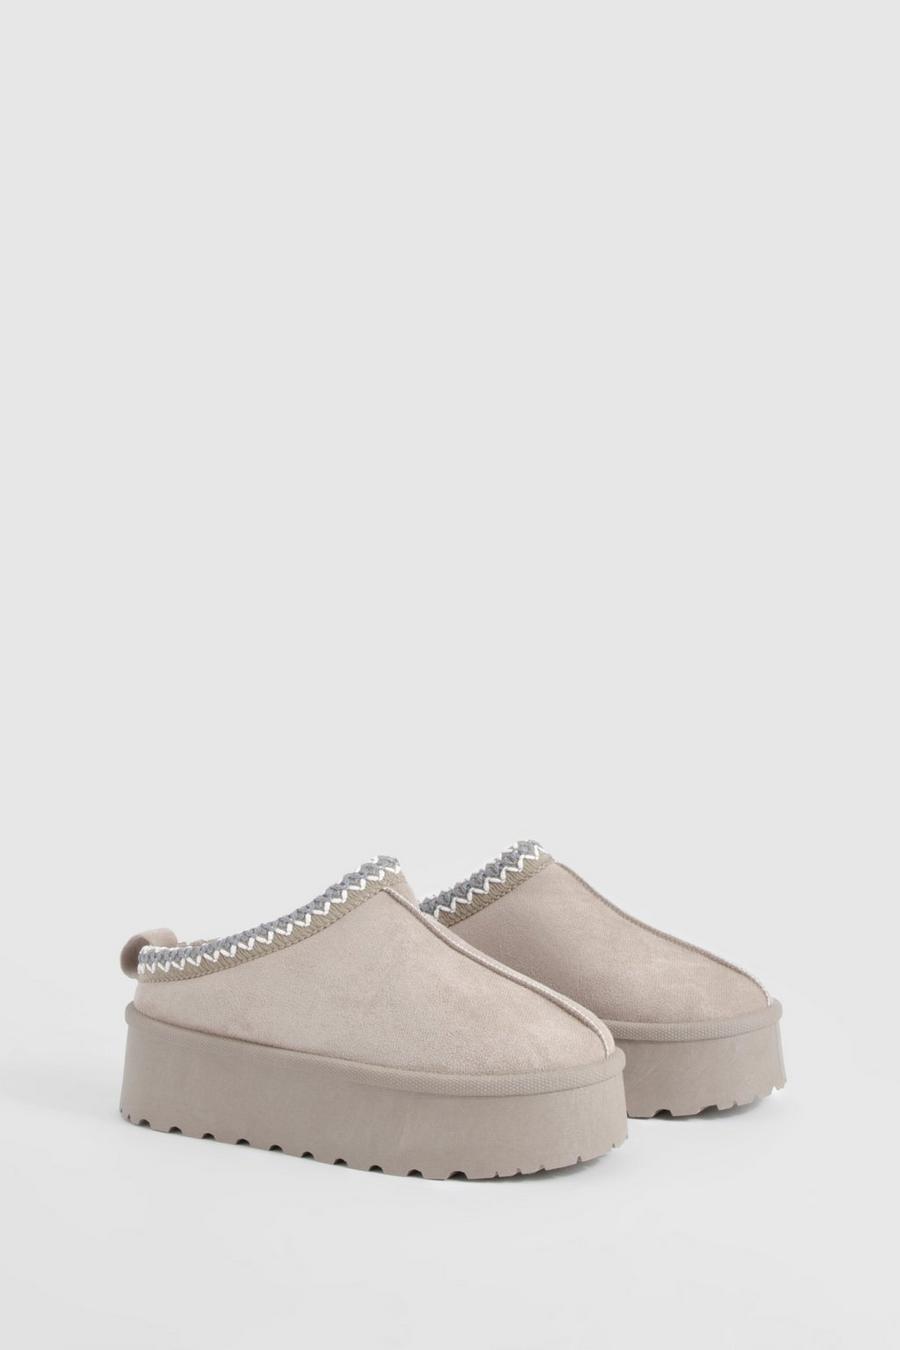 Taupe Embroidered Detailing Platform Slip On Cosy Mules          